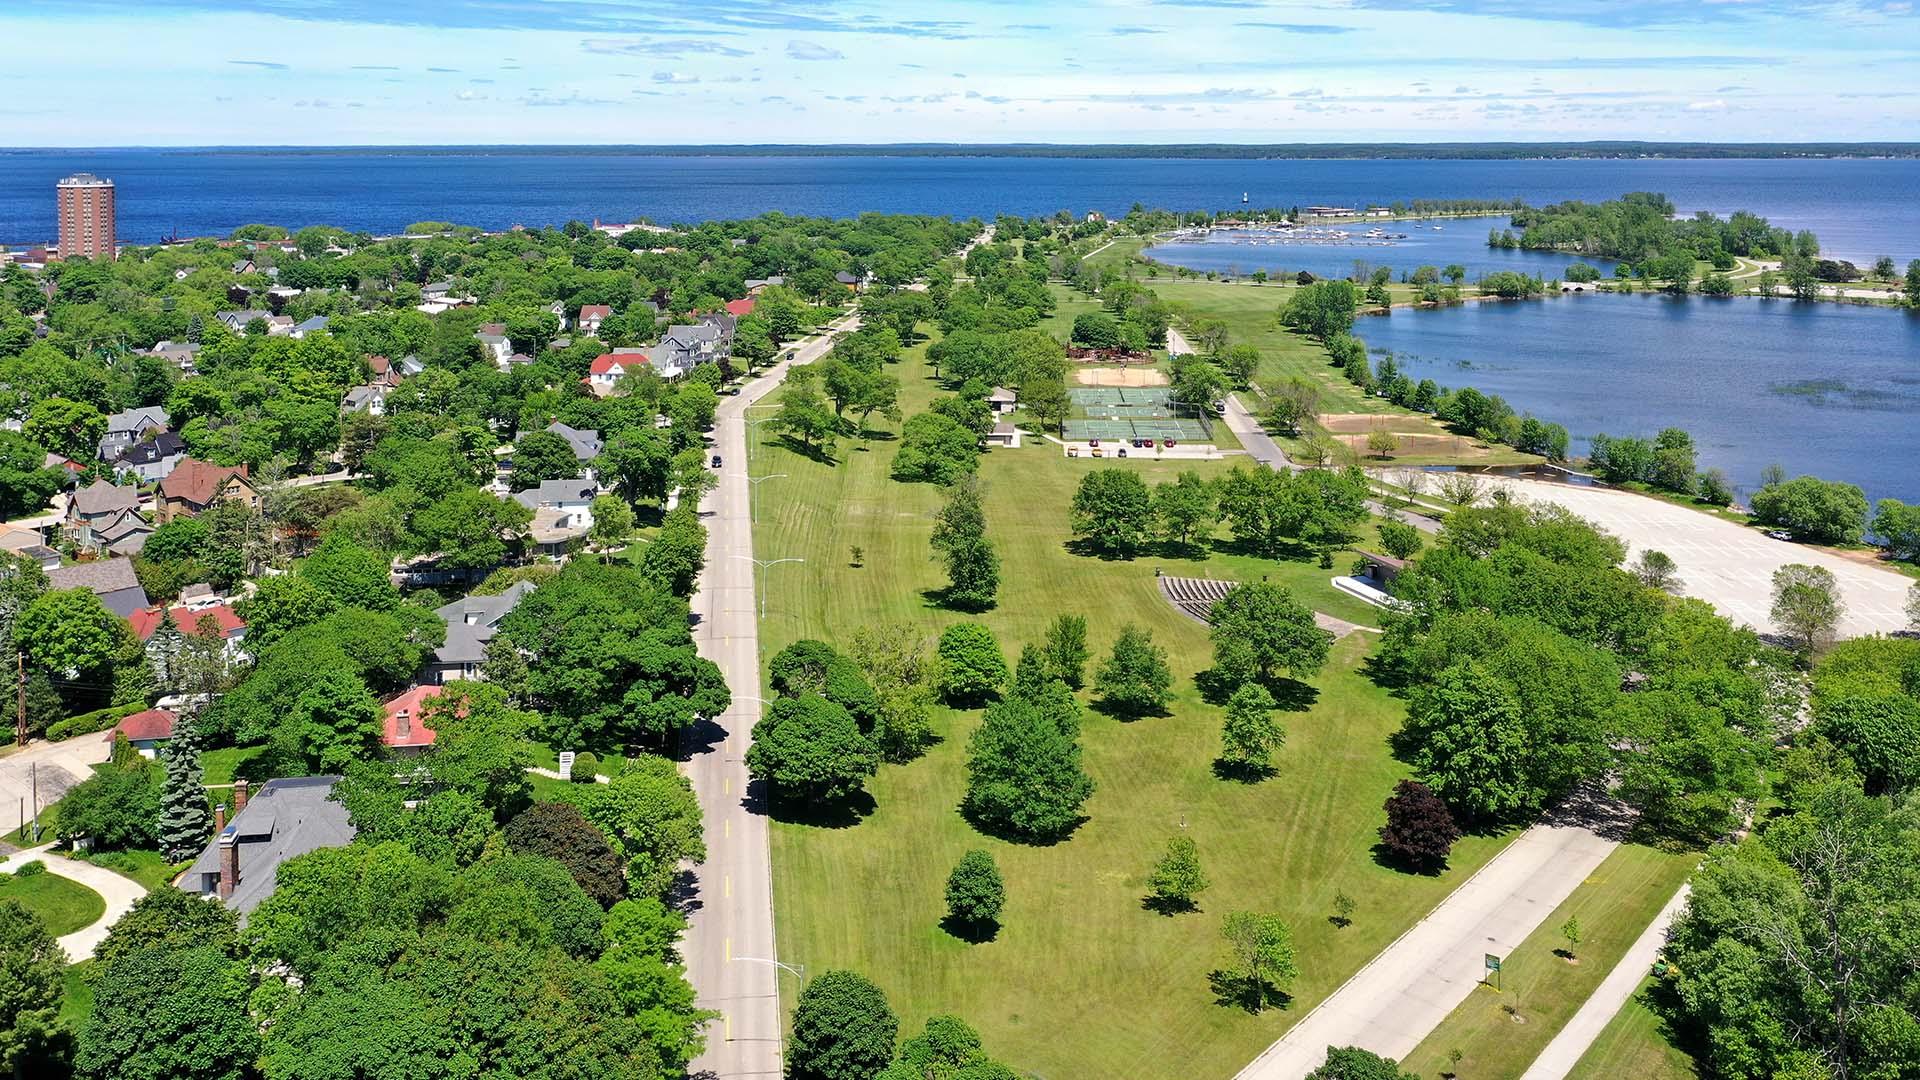 Drone Photo of Ludington Park in the Summer